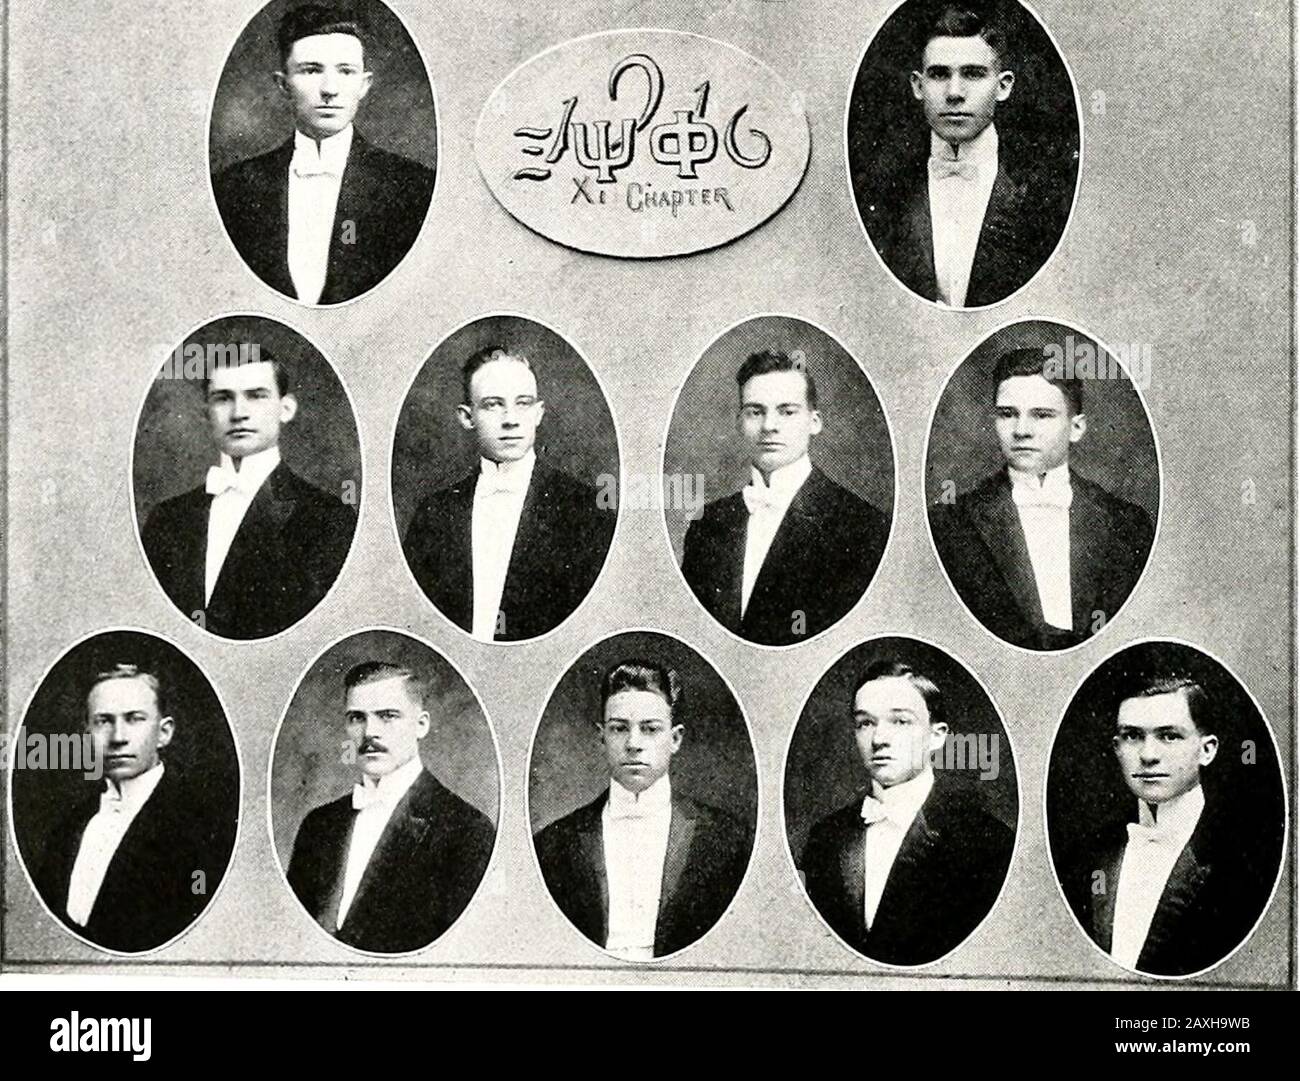 X-ray . XI PSI PHI THE 19 16 X-RAY 163 Xi Psi Phi Xi Chapter established at University College of Medicine, March 26, 1903FRATRES IN COLLEGIO Alexander, J. A.Barnes. V. M. SENIORSBurcher, A. W.Gates, E. G. Gregory, G. P.Lindberg, C. G. Baskerville, G. T.Gobbel, W. G.Miller, C. I. JUNIORSNixon, S. H.Spitler, G. L.Warden, S. C. Wood, T. W.Yates. G. N.Young, H. L. Beeks, H. S.Brown, W. J. FRESHMENInman, H. C.Sawyer. C. C. Sherman. M. M. 164 THE 1916 X-RAY Xi Psi Phi FRATRES IN FACULTATE Dr. R. L. Simpson Dr. R. C. Walden Dr J. M. Hughes Dr. R. H. Jeffries Dr. B. T. Blackwell FRATRES IN URBE Dr. T Stock Photo